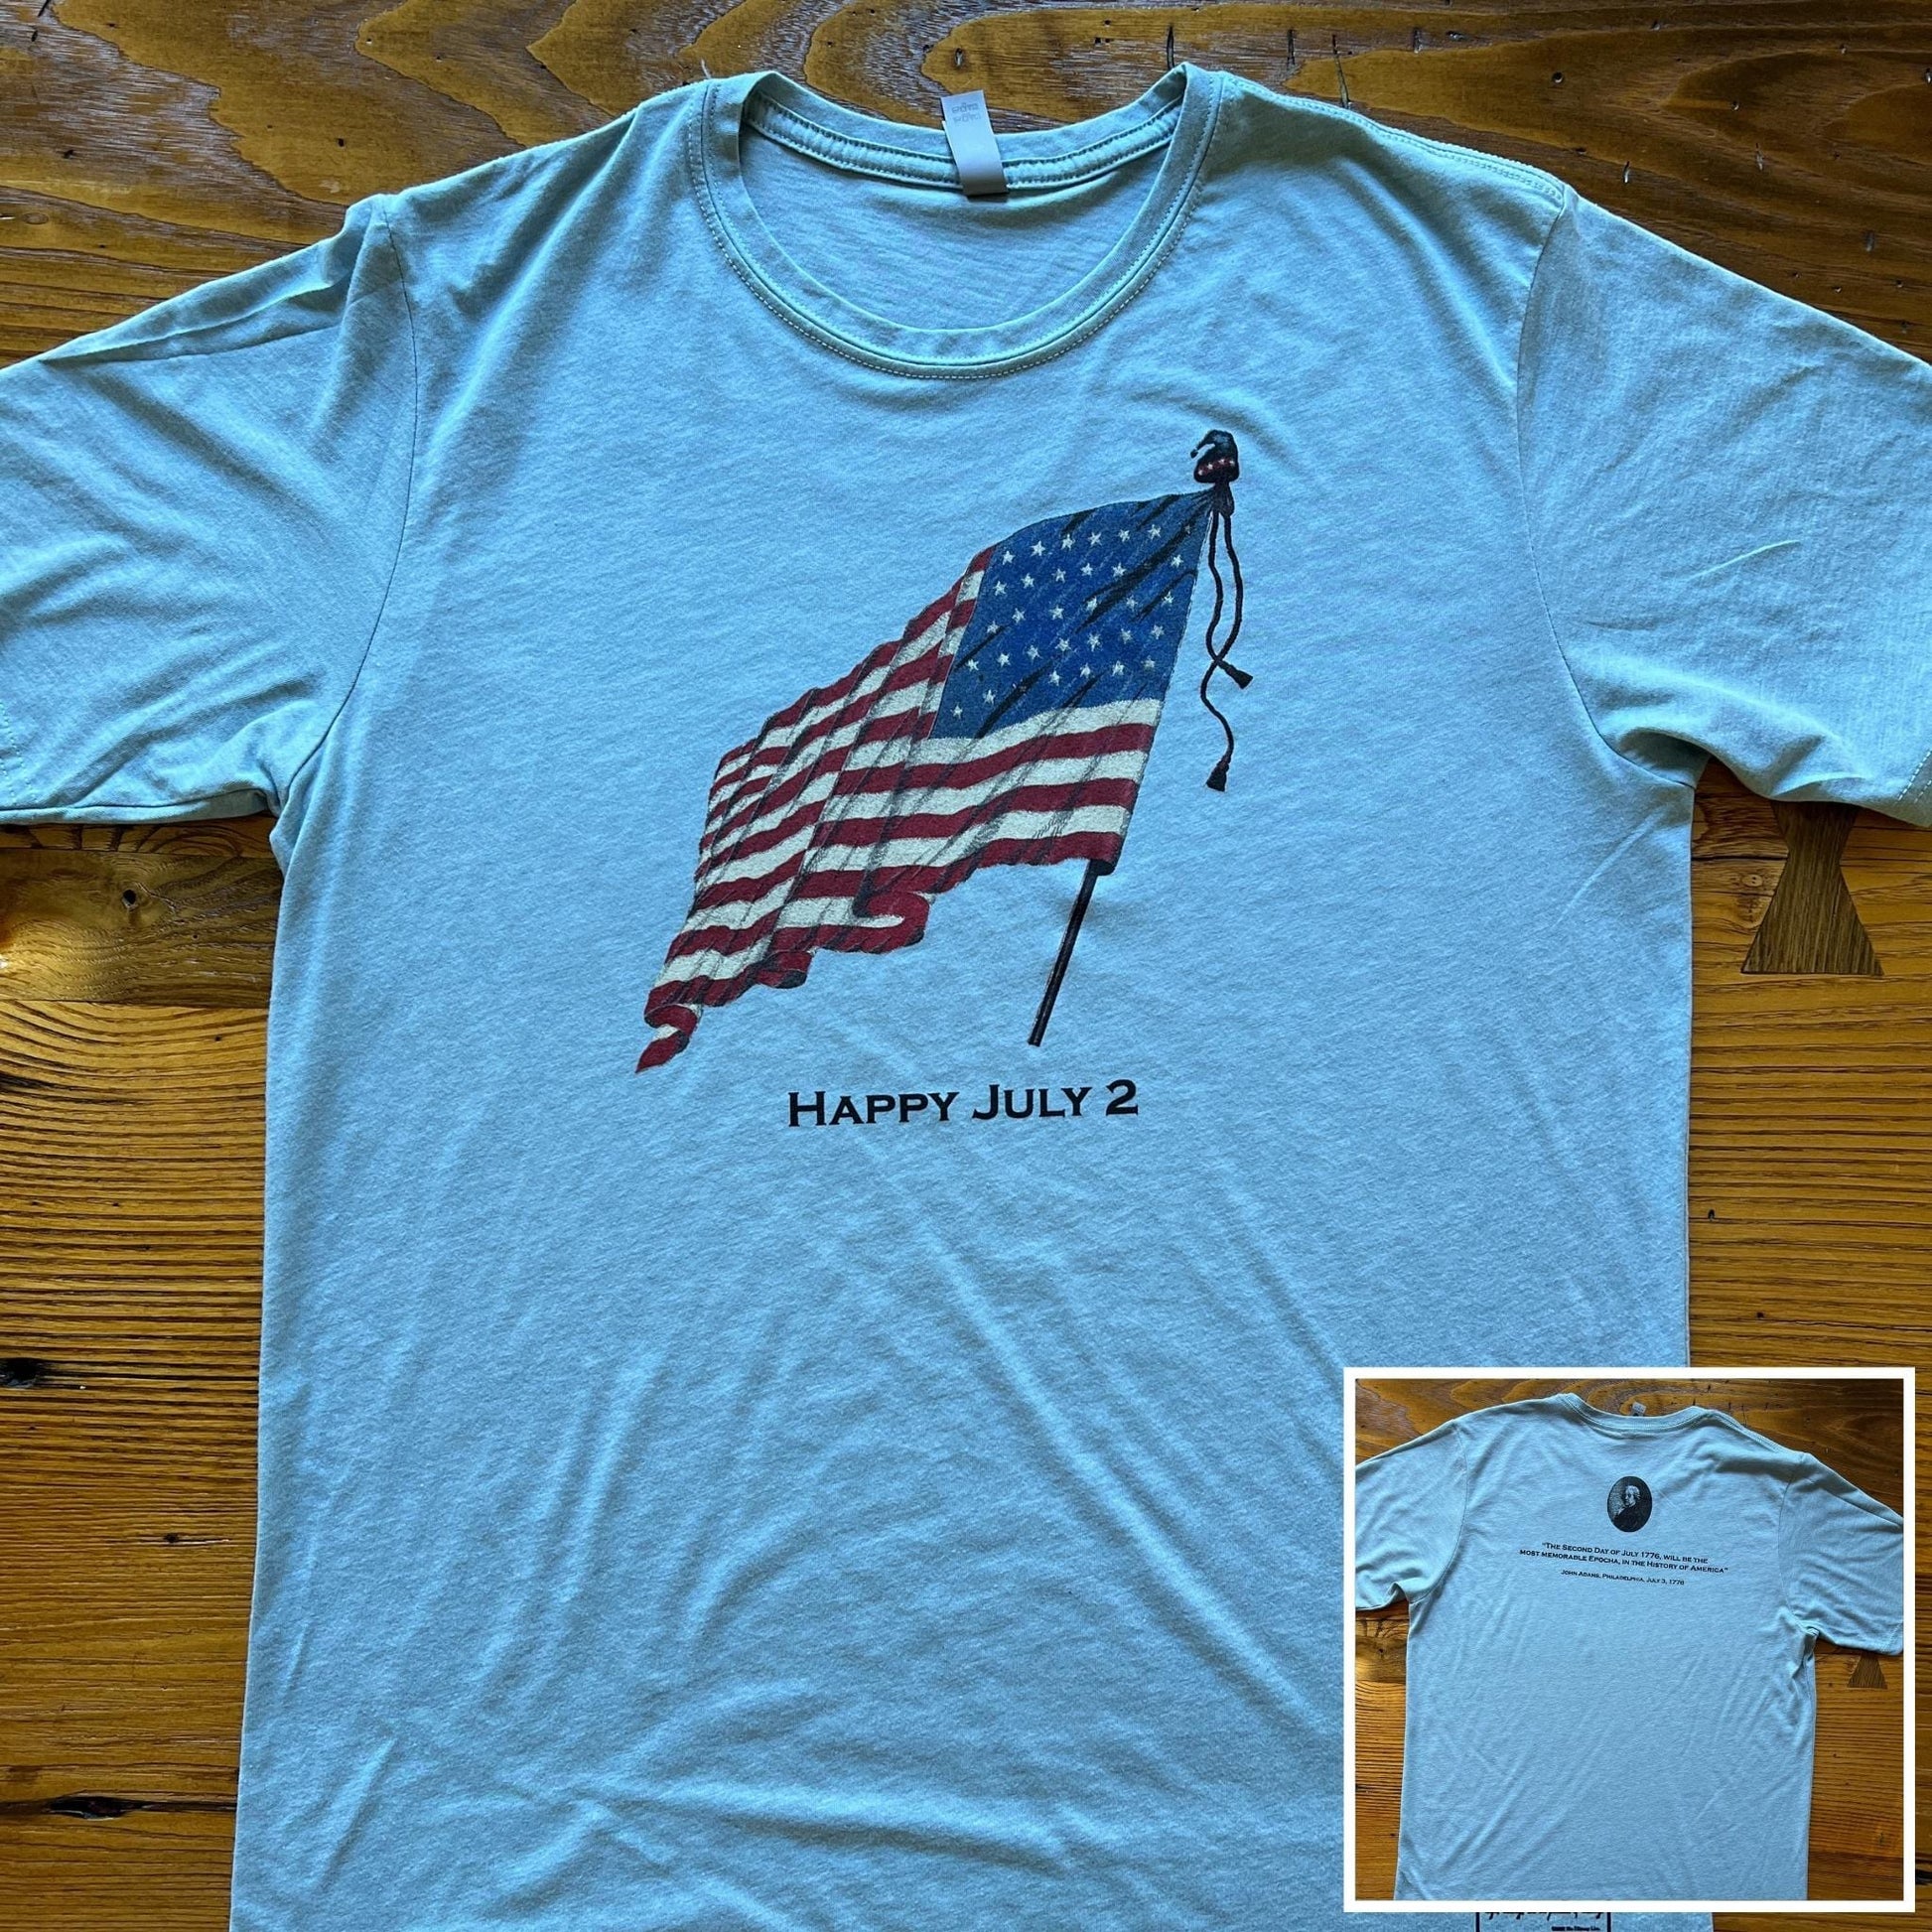 Made in USA "Happy July 2” T-shirt with John Adams and his quote on the back from the history list store